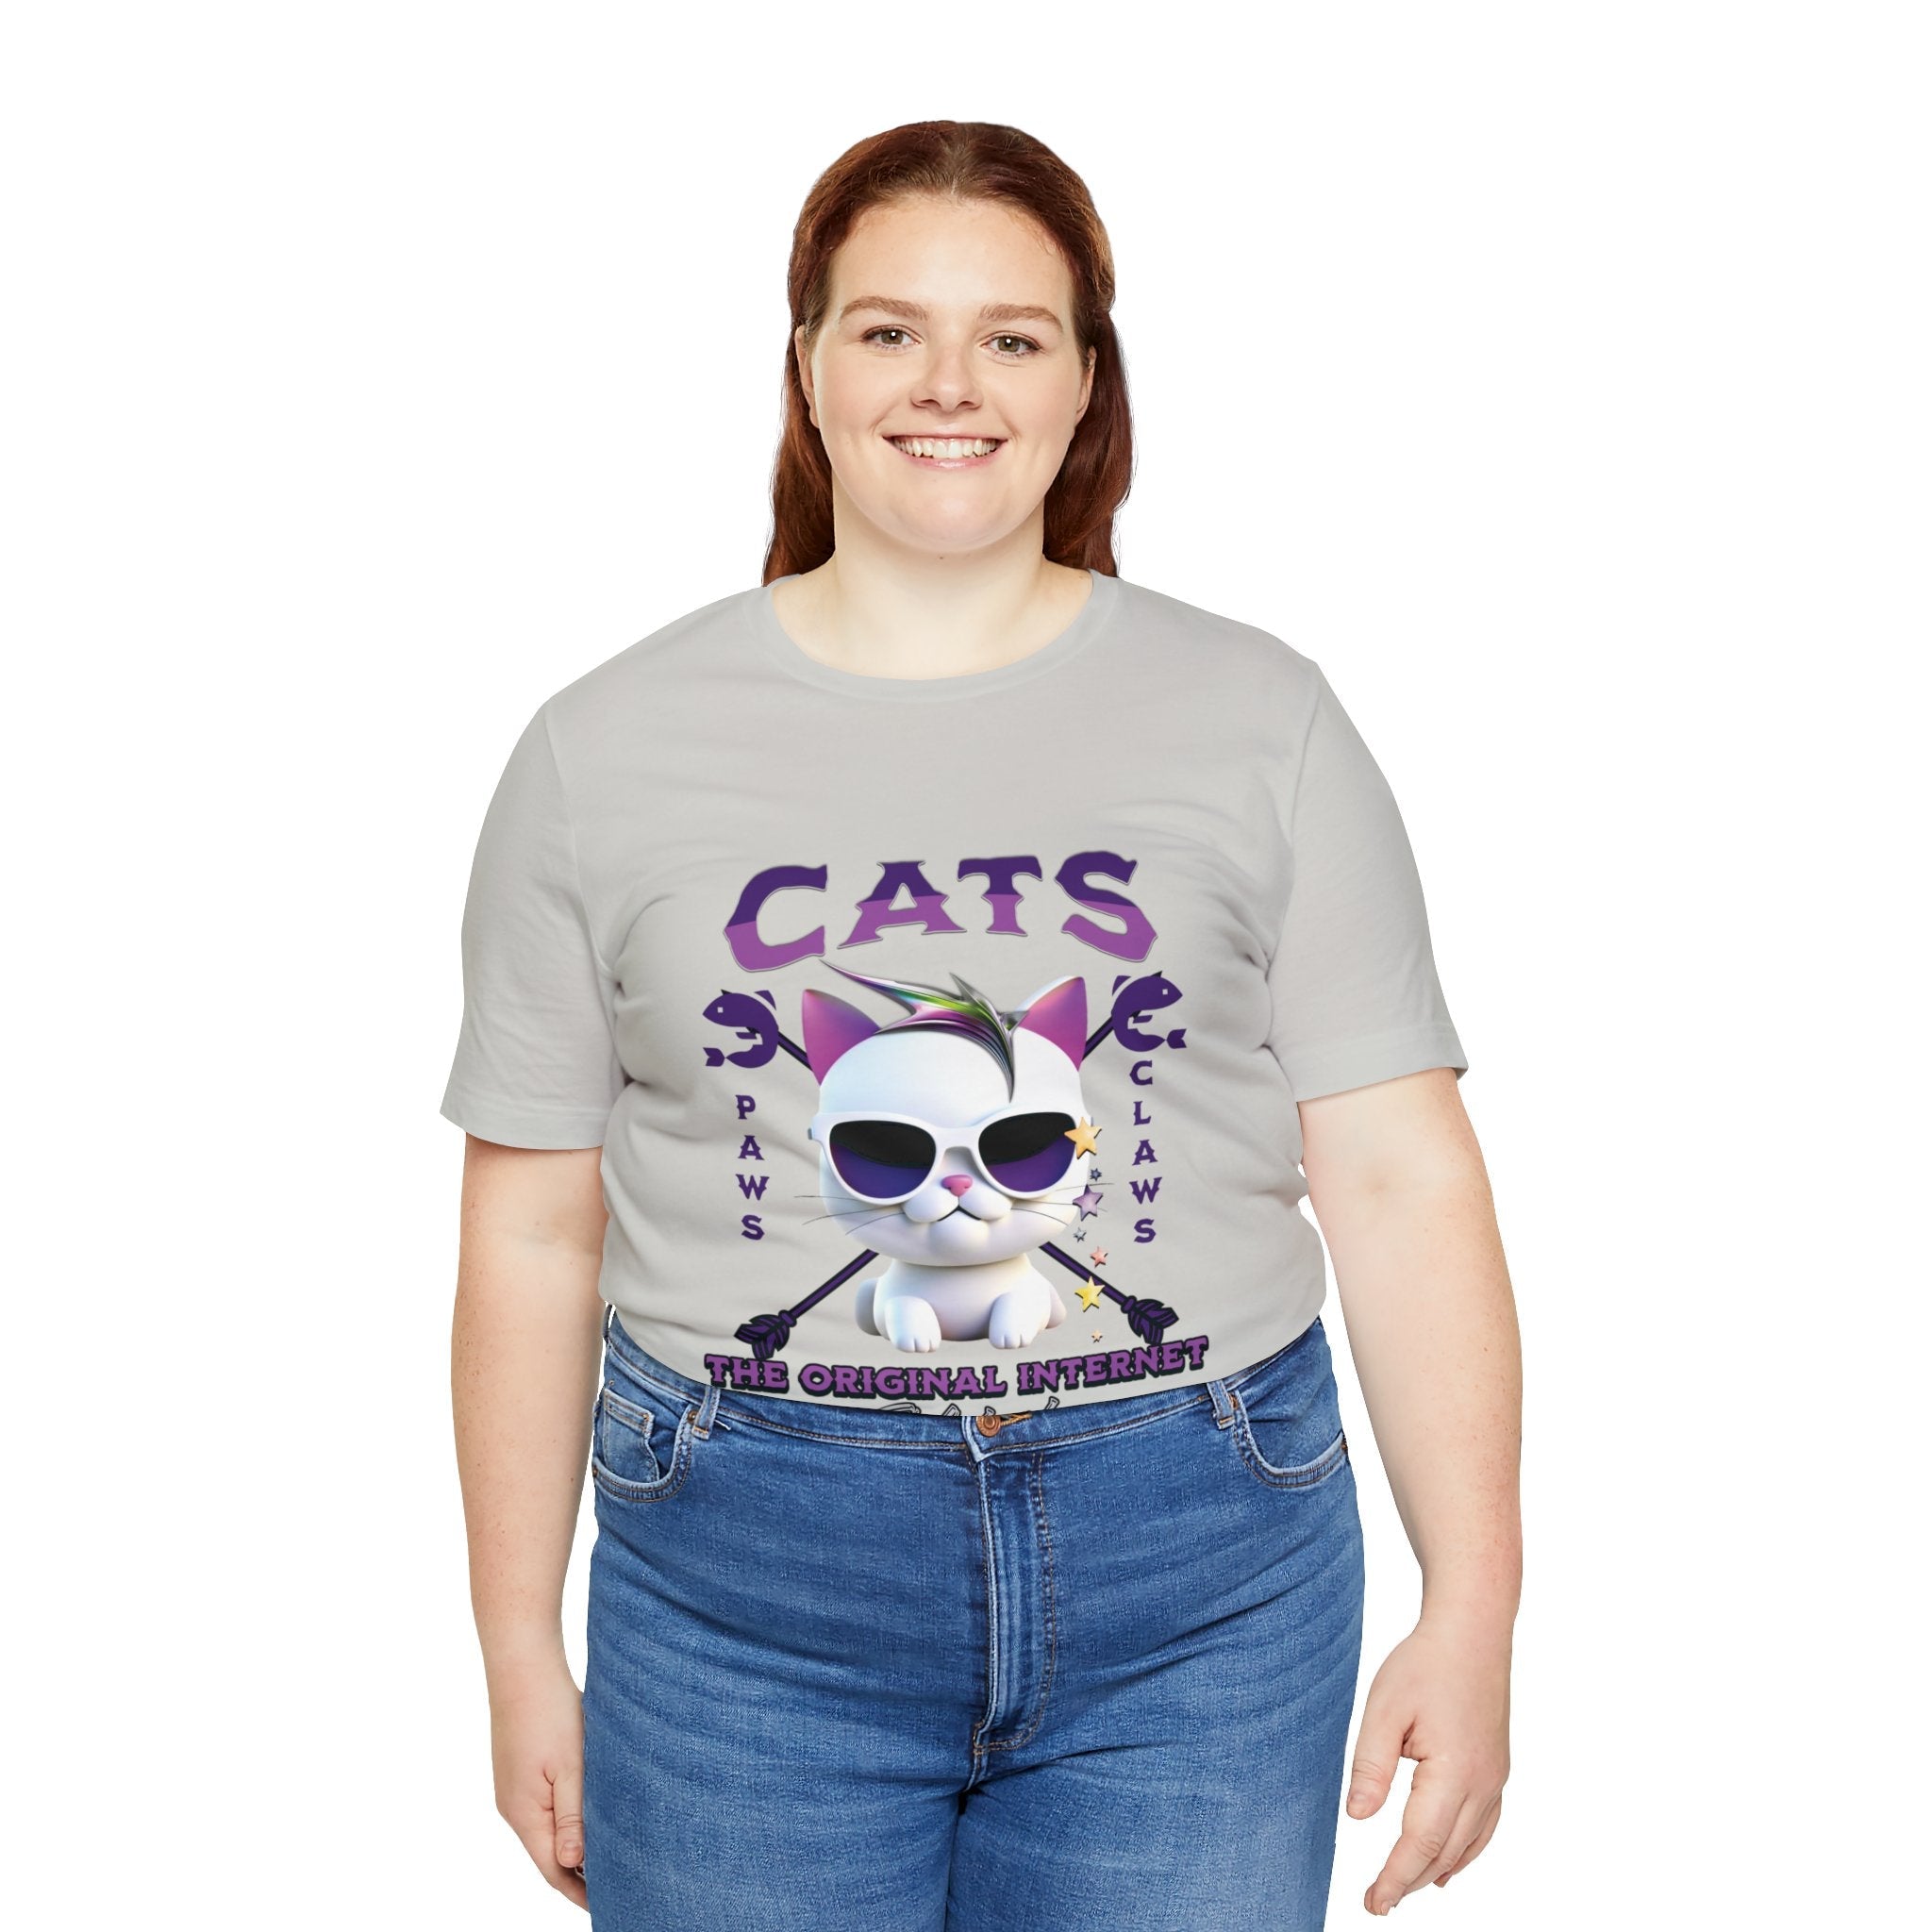 "Cats: The Original Internet Celebrity" Unisex 3 D Cat Tee - Pawsitively Iconic! - MTL Dynamic StylesT-Shirt